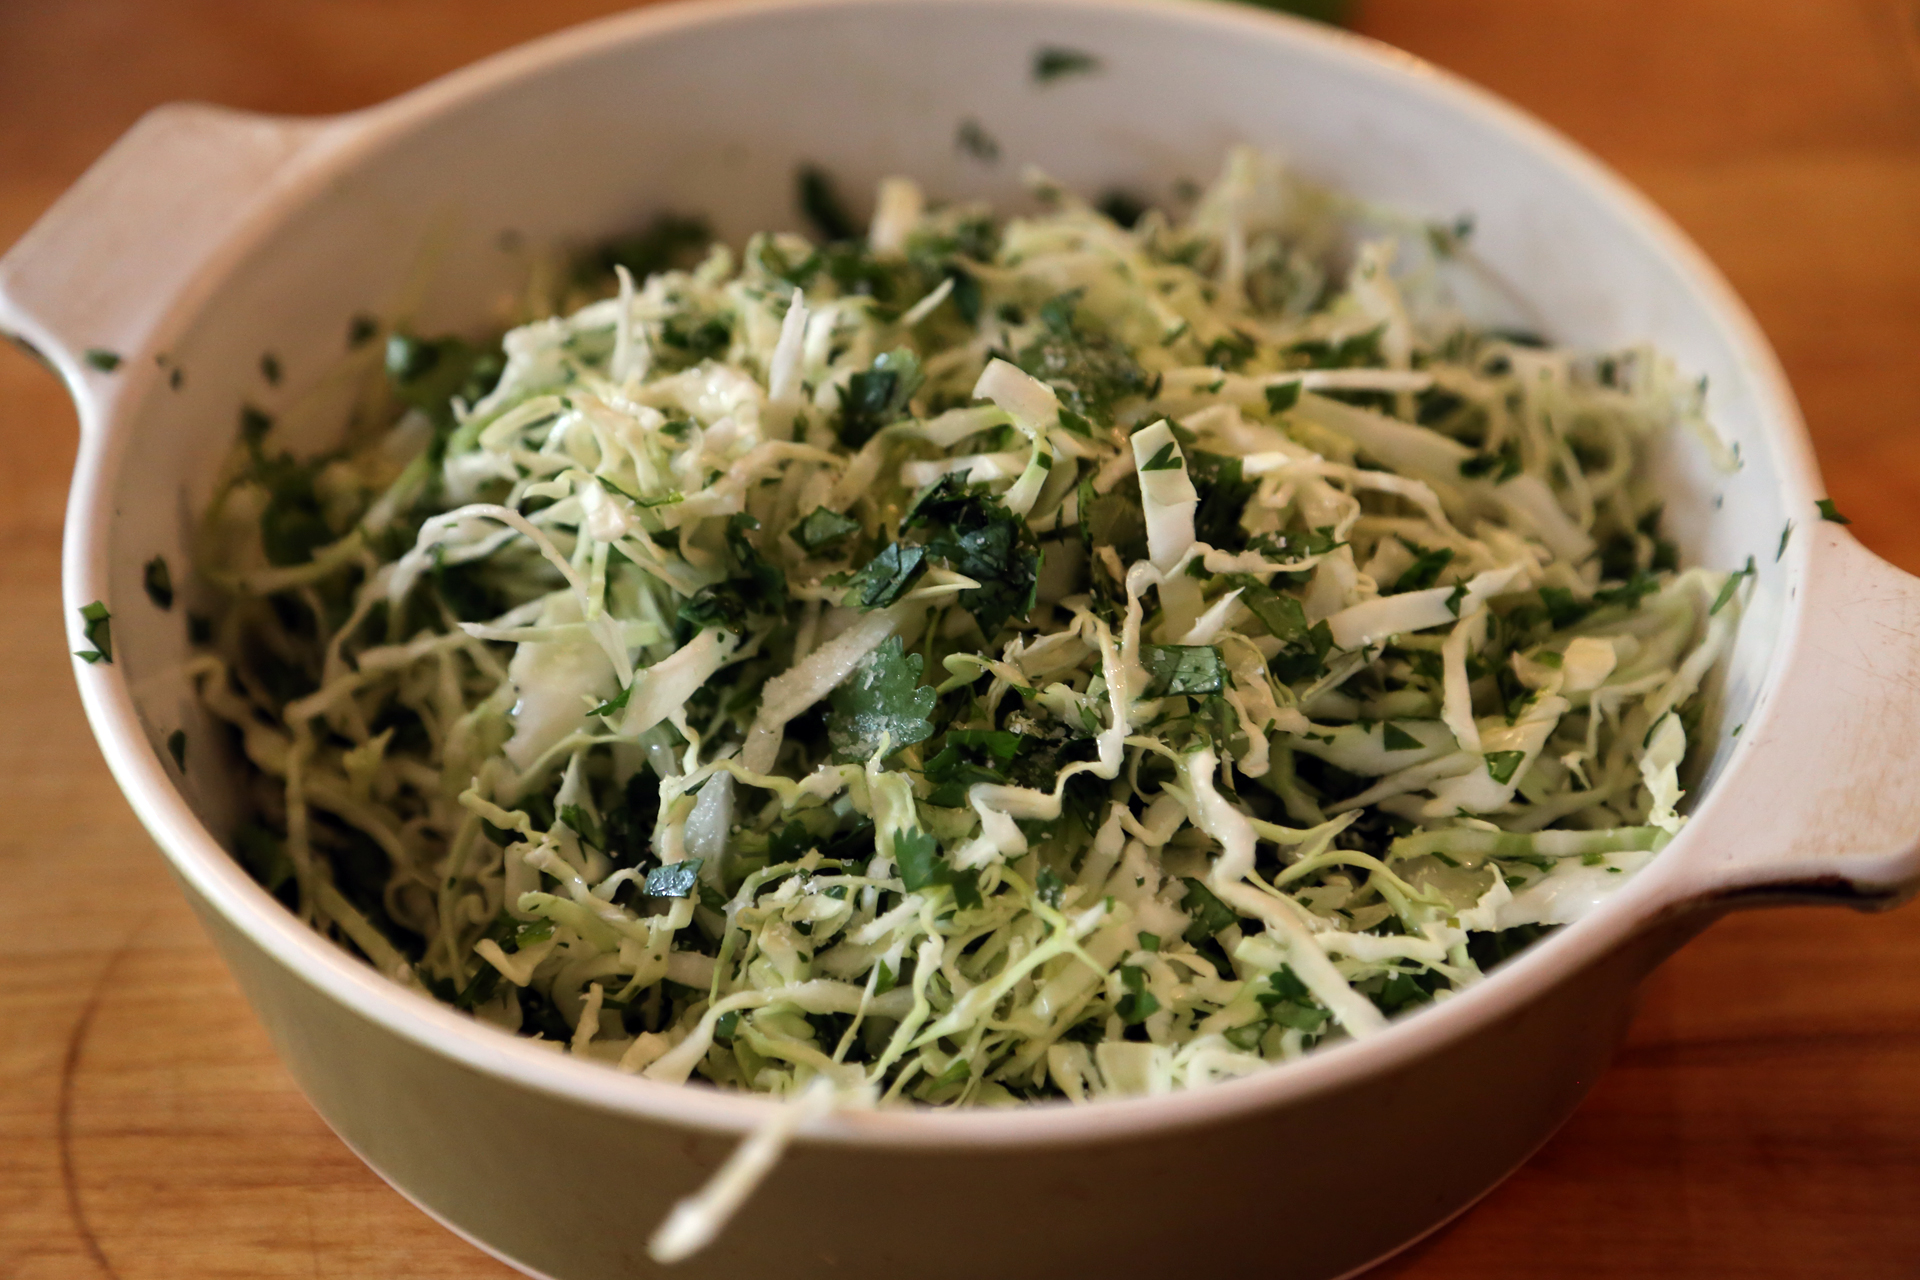 In a third bowl, stir together the cabbage and cilantro, then sprinkle with the vinegar and season with salt and pepper.